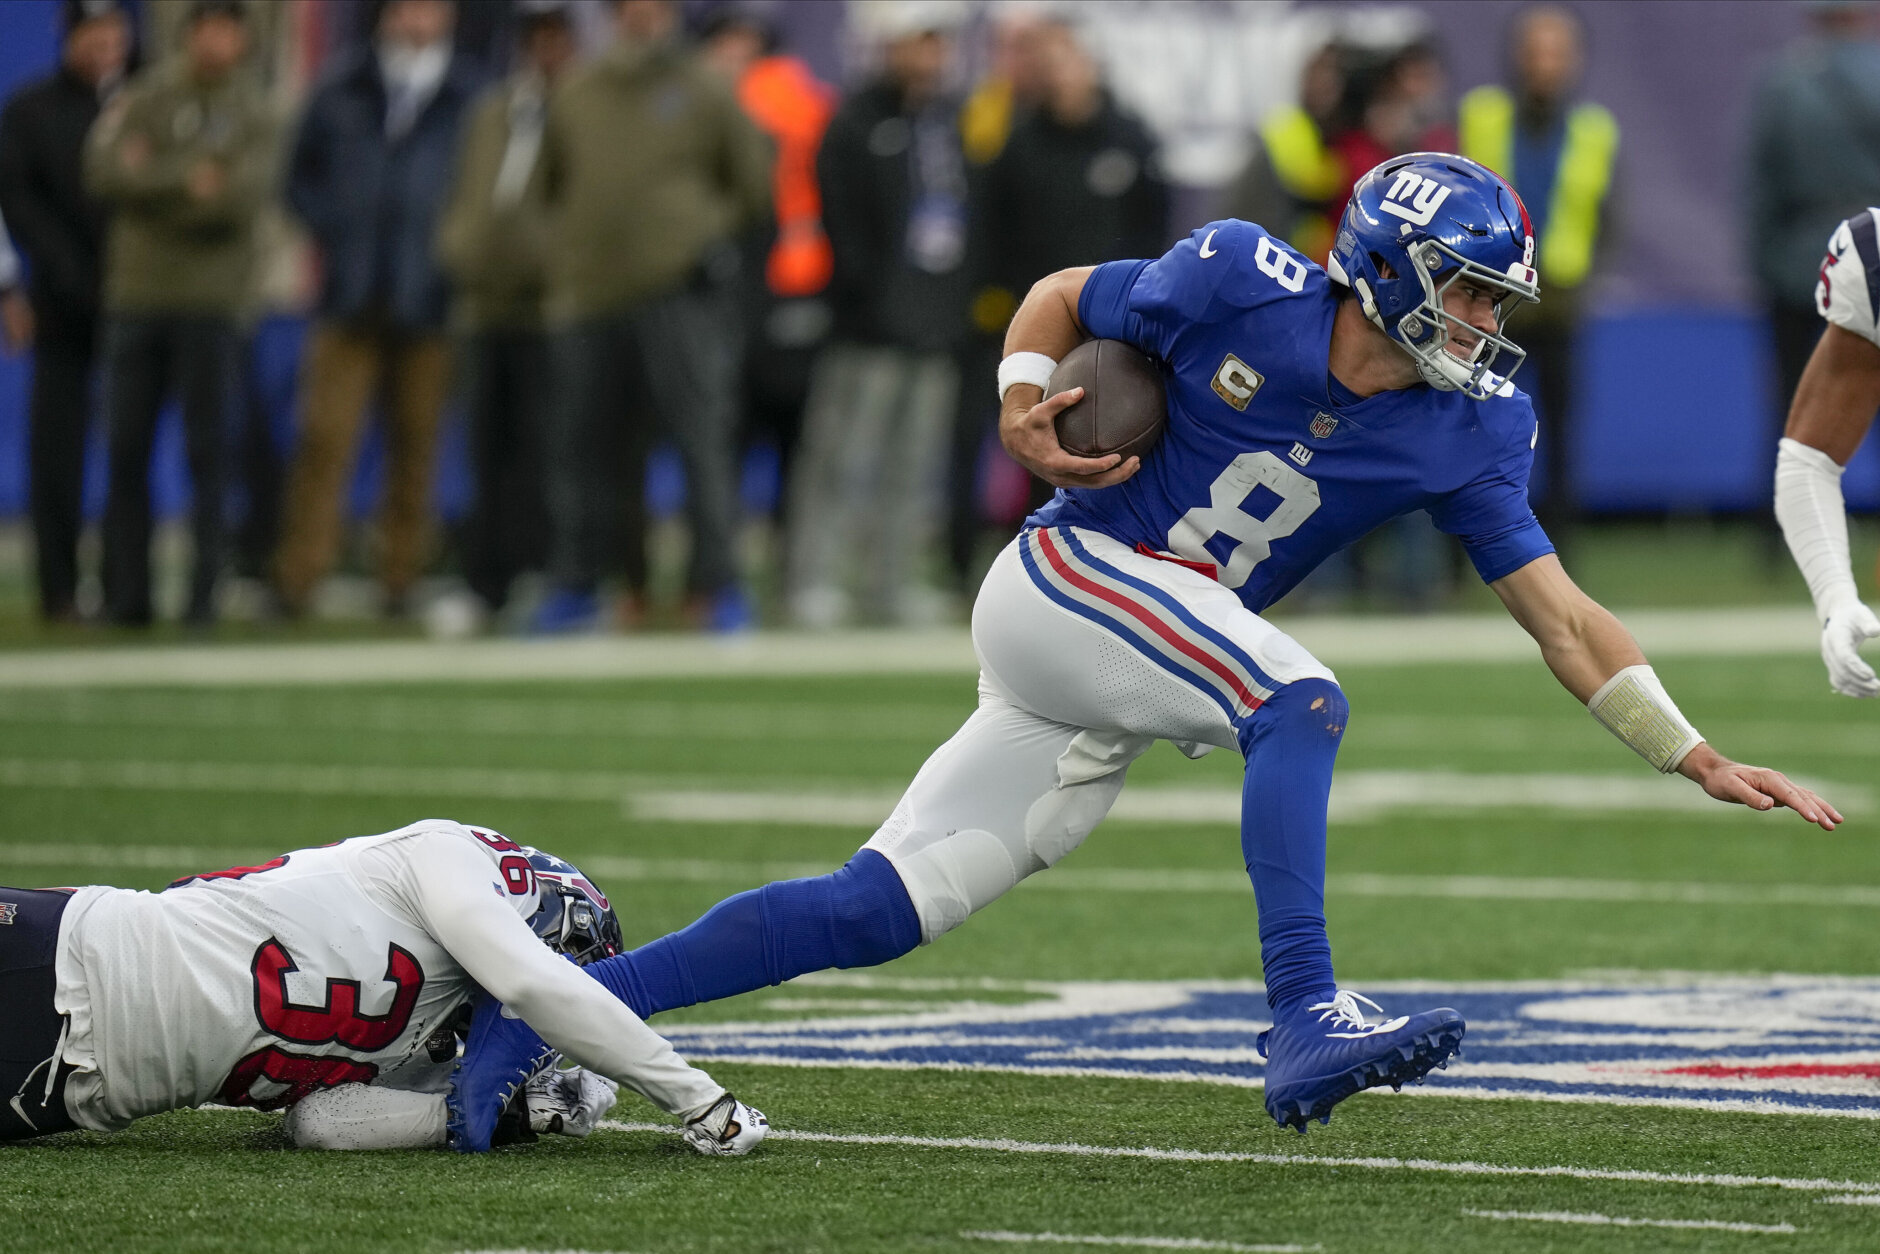 <p><b><i>Texans 16</i></b><br />
<b><i>Giants 24</i></b></p>
<p>Big Blue is <a href="https://www.espn.com/nfl/story/_/id/35022635/giants-feed-saquon-barkley-35-carries-victory-talks-tabled" target="_blank" rel="noopener">riding Saquon until the wheels fall off</a> but this team is unexpectedly off to its best start since 2008 thanks to Daniel Jones&#8217; big improvement protecting the football: Jones is the first Giants QB to go six straight starts with no interceptions since Phil Simms in the early 90s, helping New York (finally) win close games.</p>
<p>Conversely, Houston has a problem: The Texans are 0-6 when Davis Mills gets intercepted so the blueprint has been laid out for Washington next Sunday.</p>
